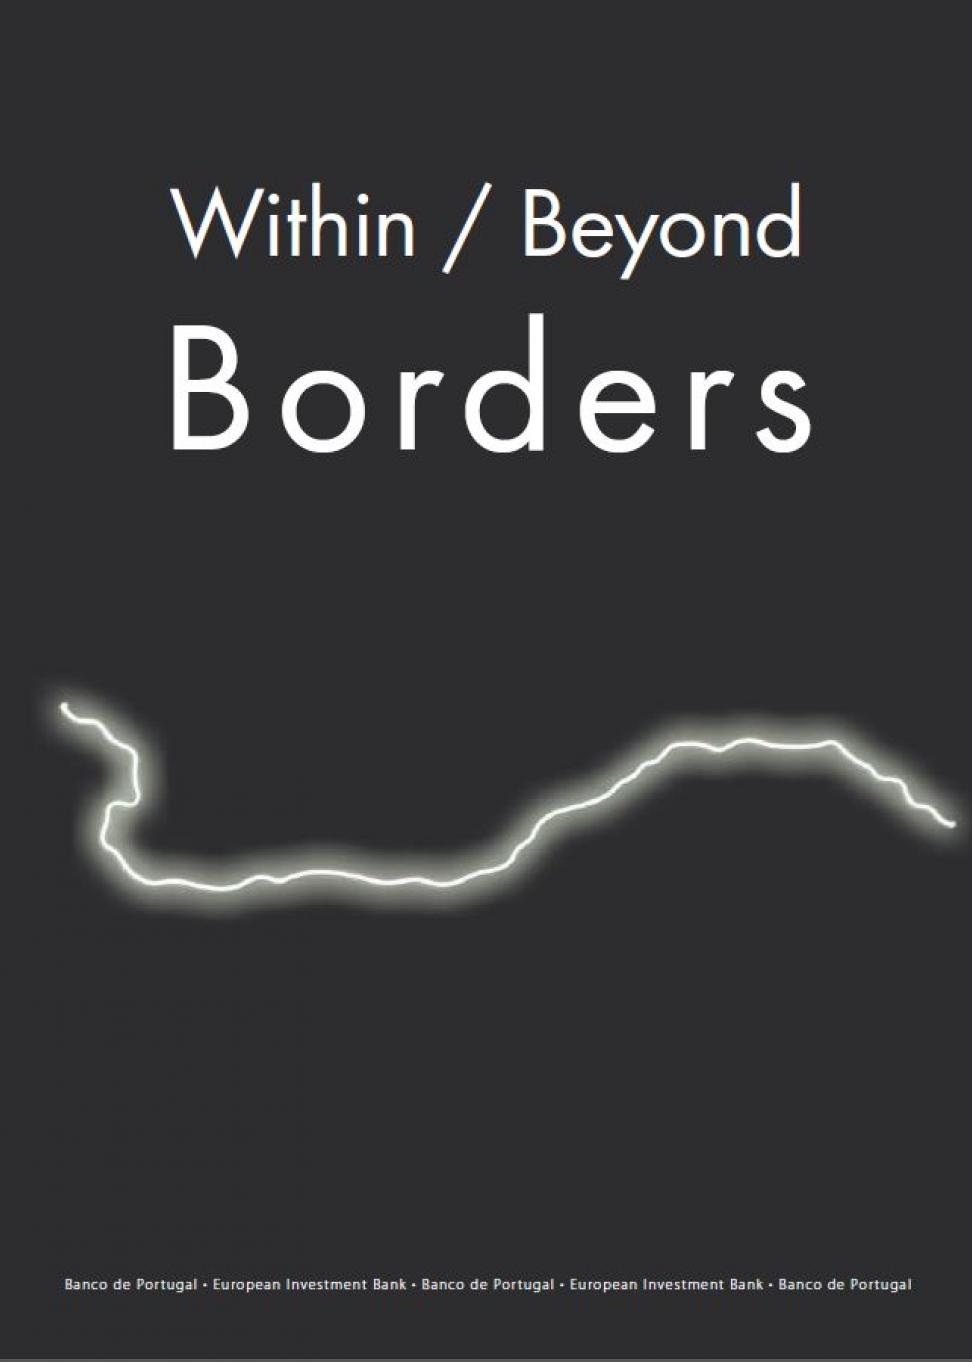 Within / Beyond Borders